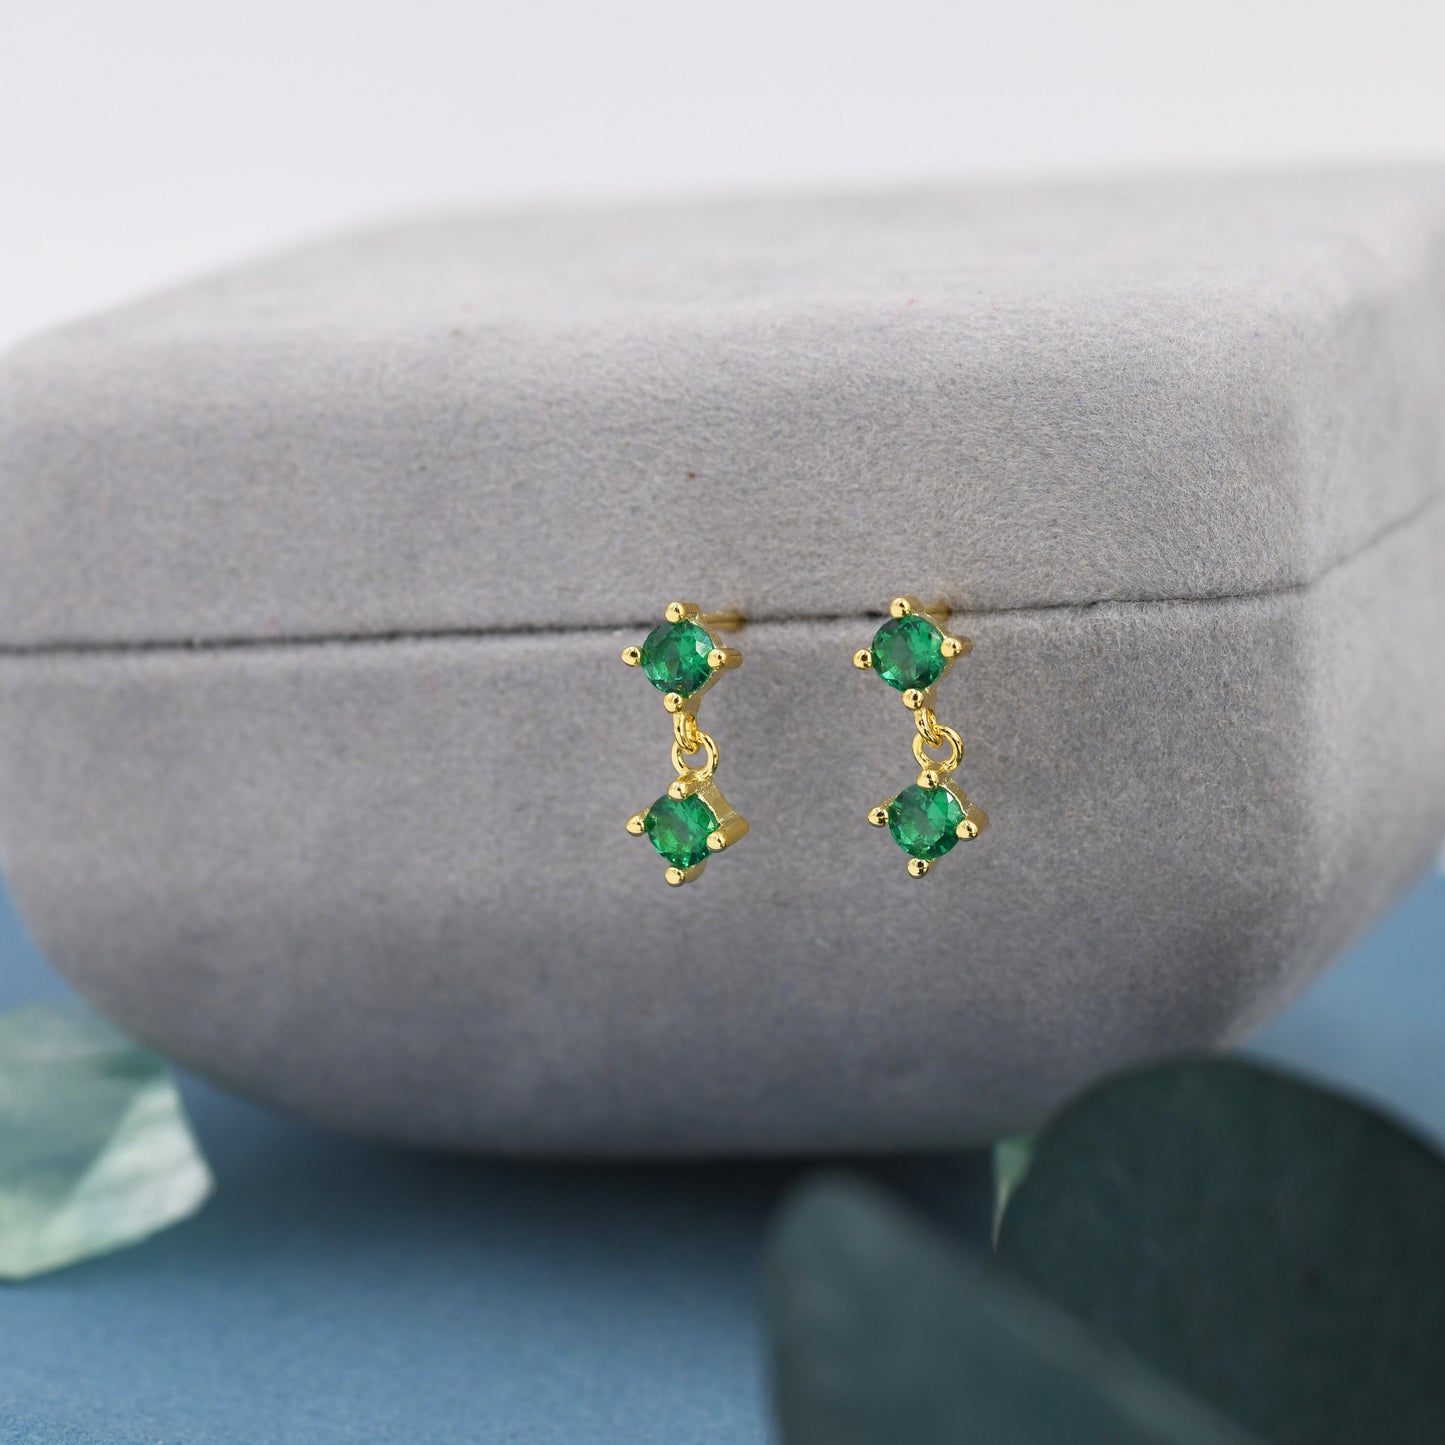 Tiny Emerald Green Double CZ Dangle Stud Earrings in Sterling Silver, Silver or Gold, Two CZ Prong Earrings, Solid Silver Crystal Earring